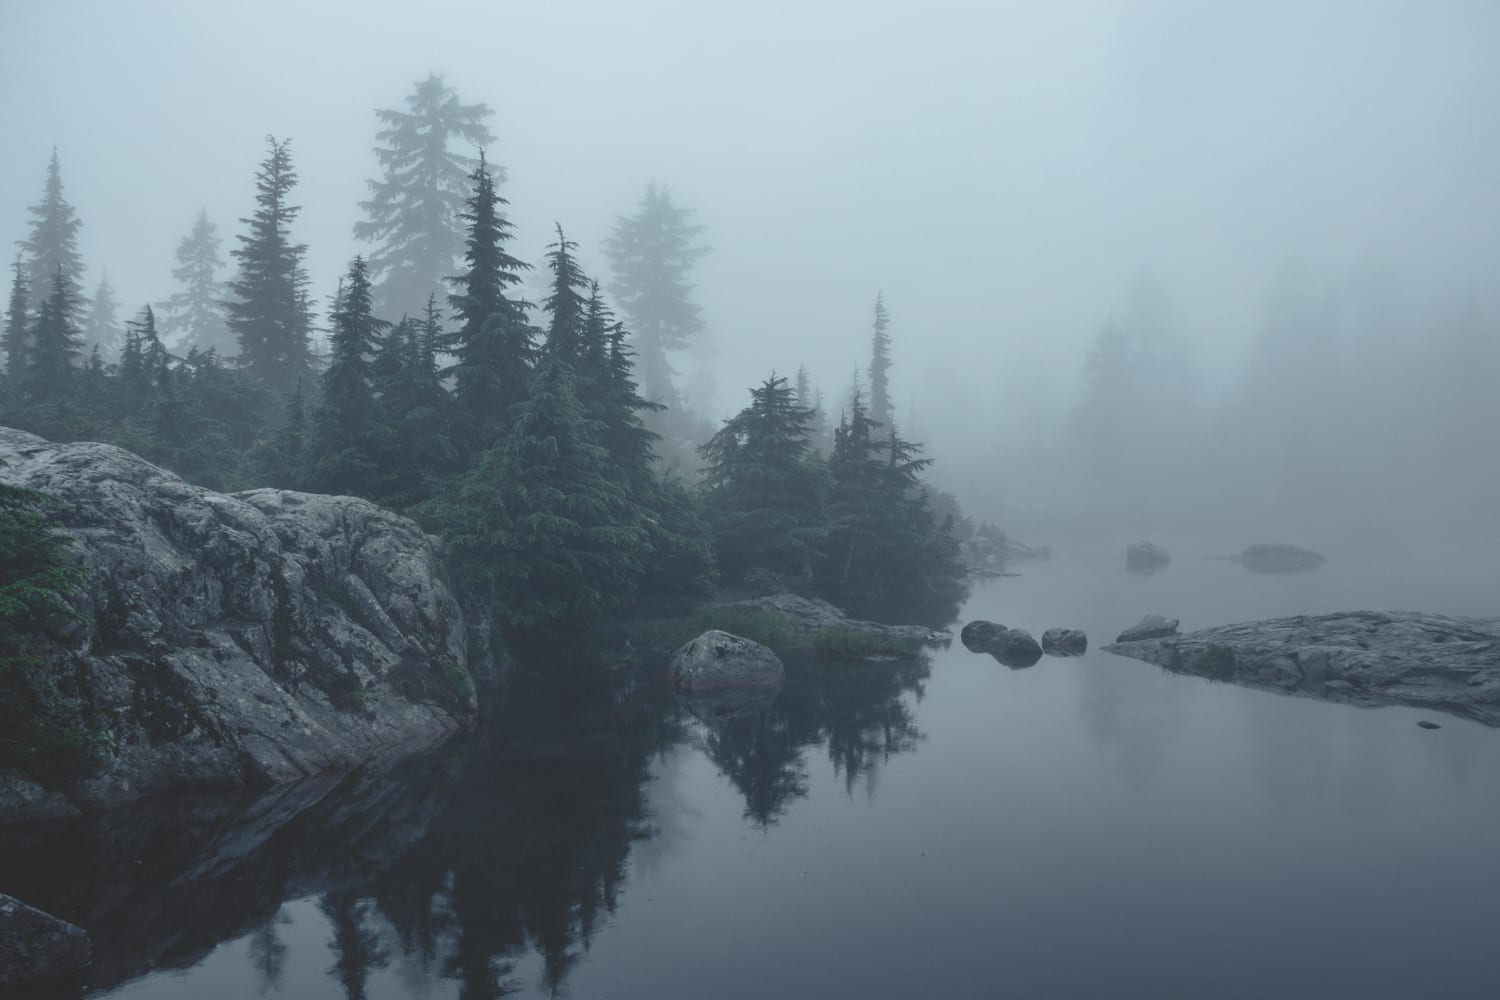 Fog on a mountain side lake - North Vancouver, BC. Canada